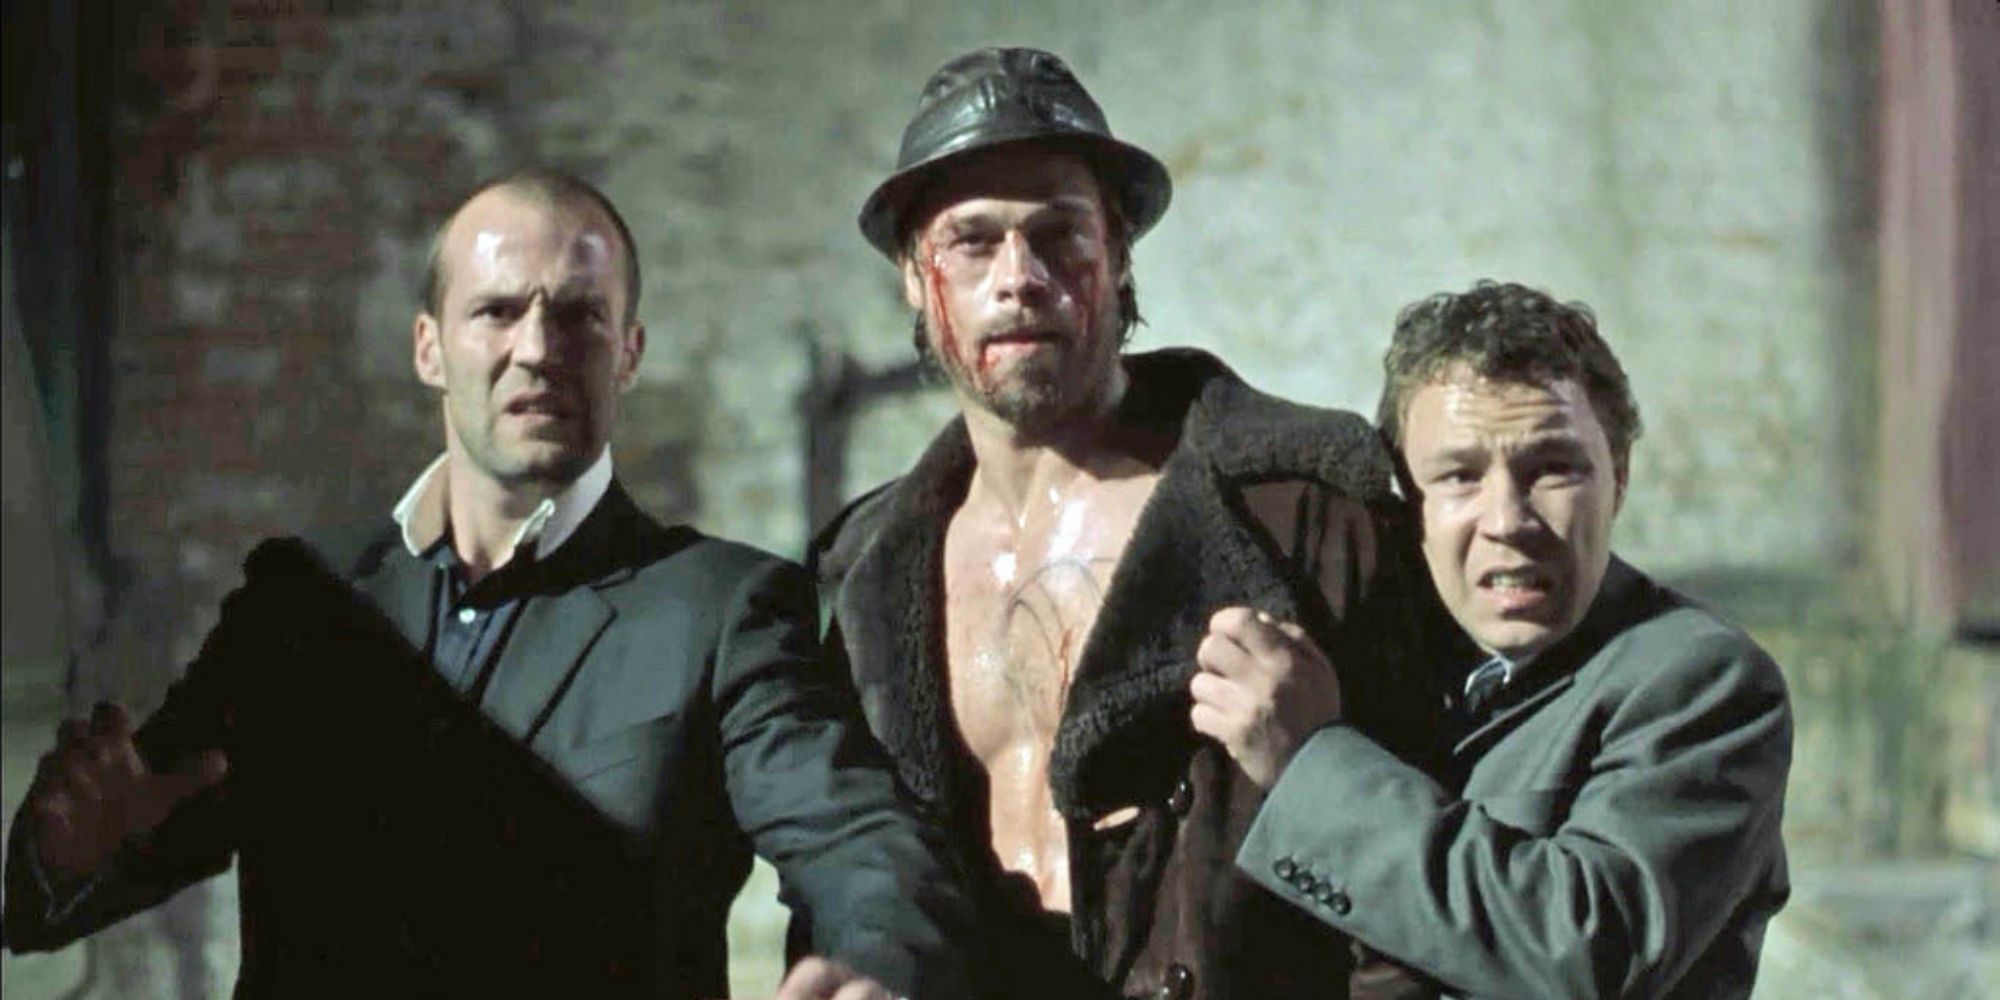 Jason Statham as Turkish, Brad Pitt as Mickey, and Stephen Graham as Tommy looking scared in Snatch